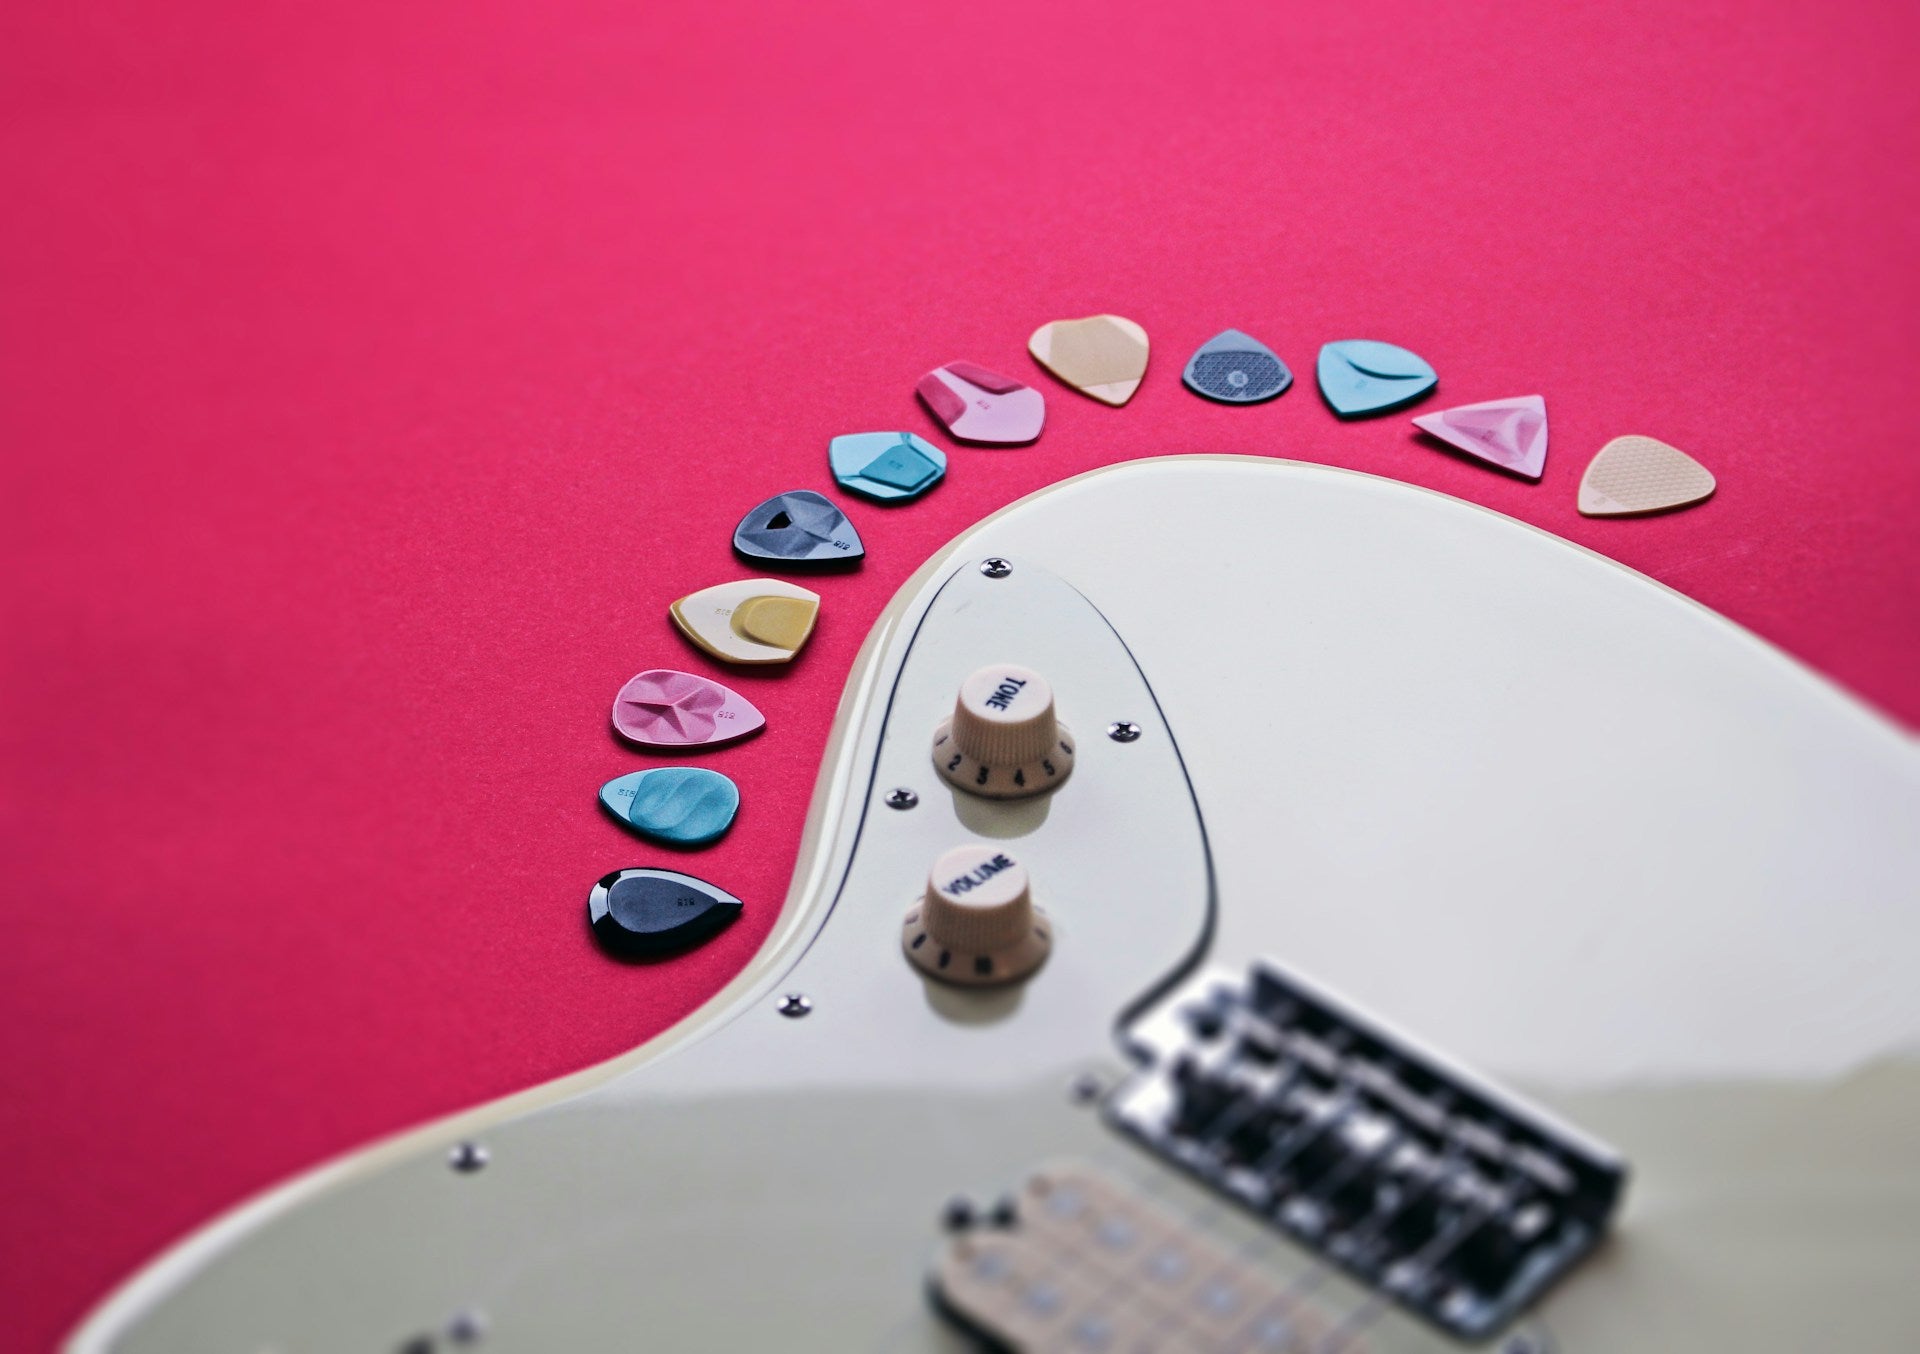 Guitar Pick Mastery: Exploring Shapes, Materials, and Techniques for Better Tone and Control